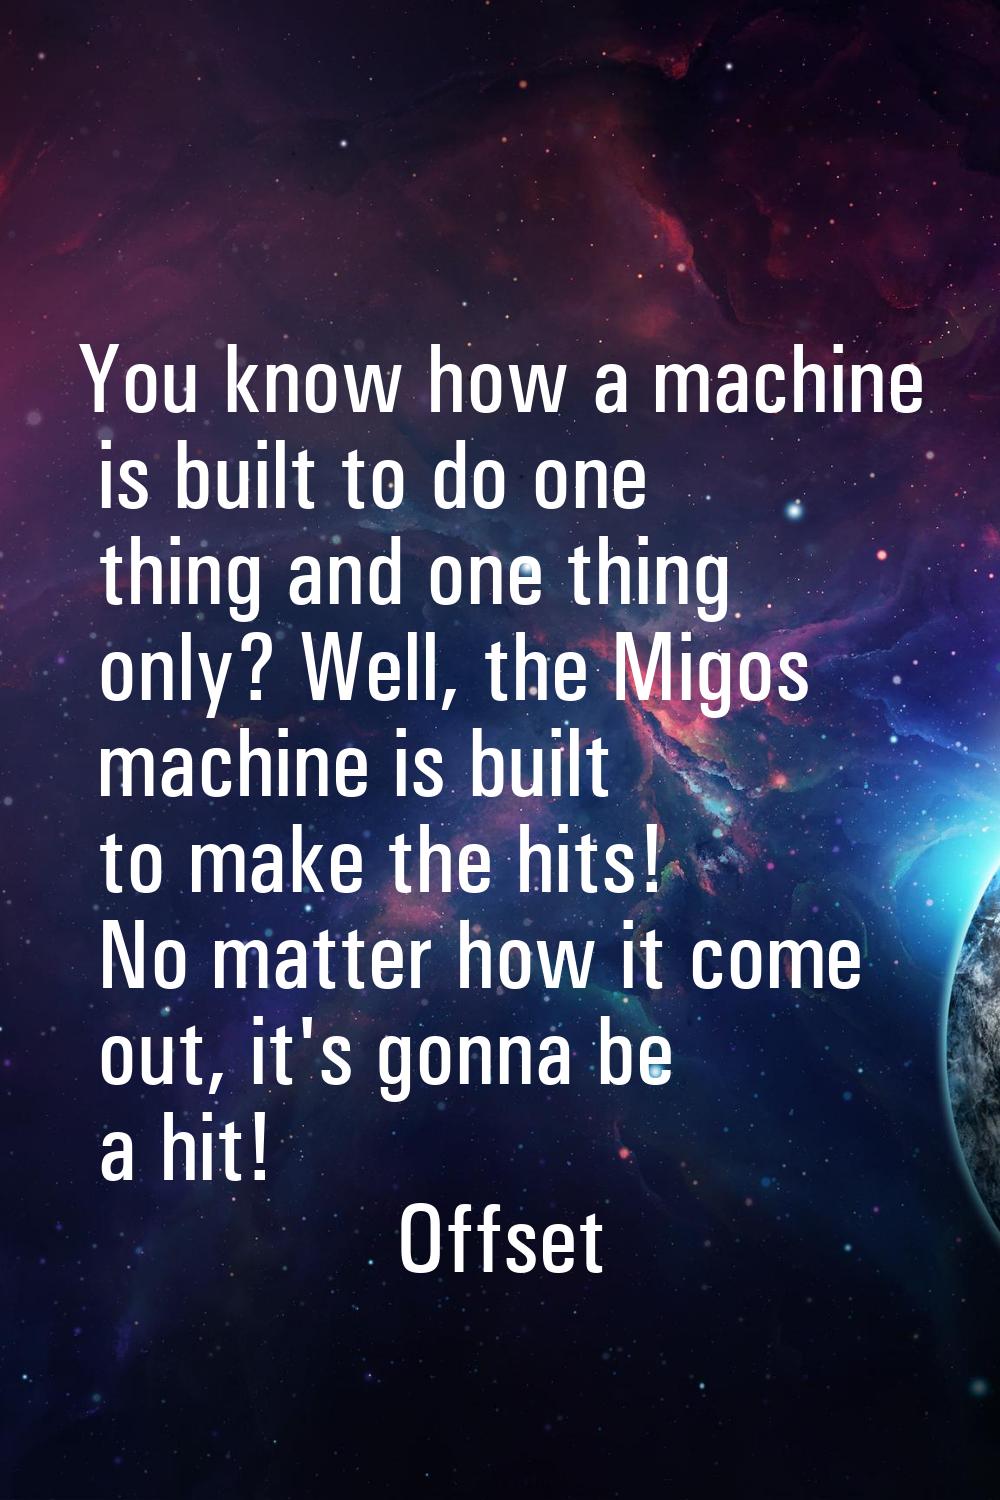 You know how a machine is built to do one thing and one thing only? Well, the Migos machine is buil